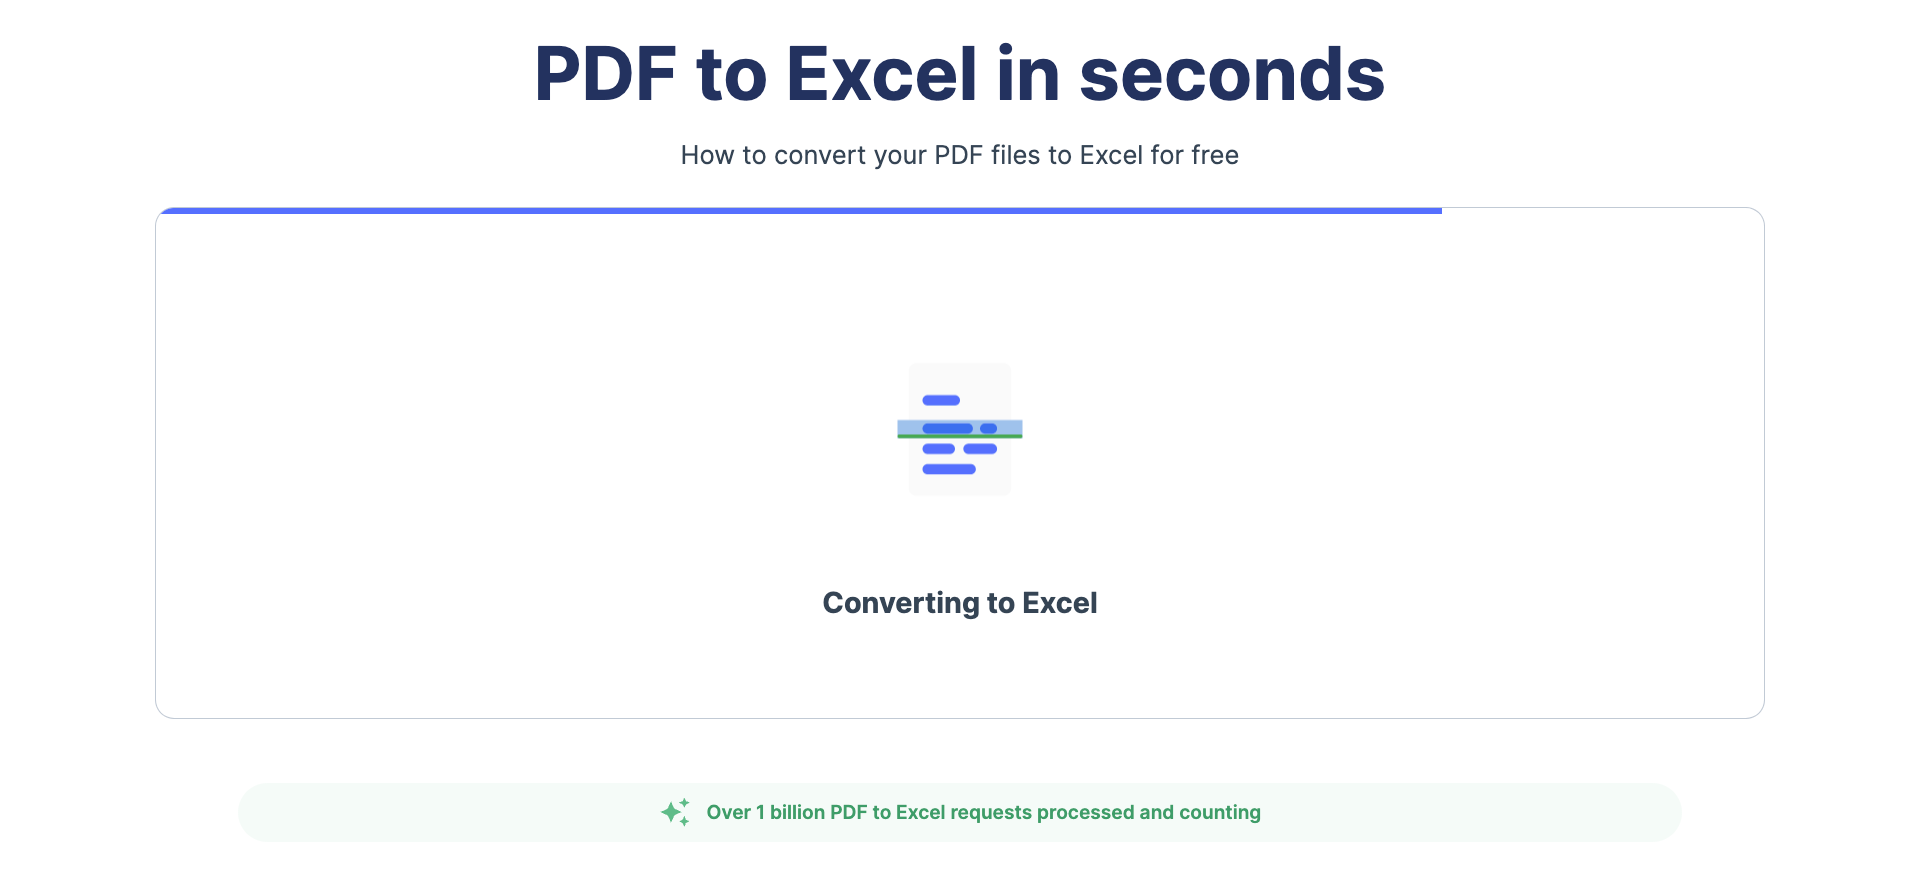 Click on Convert to start PDF to Excel conversion